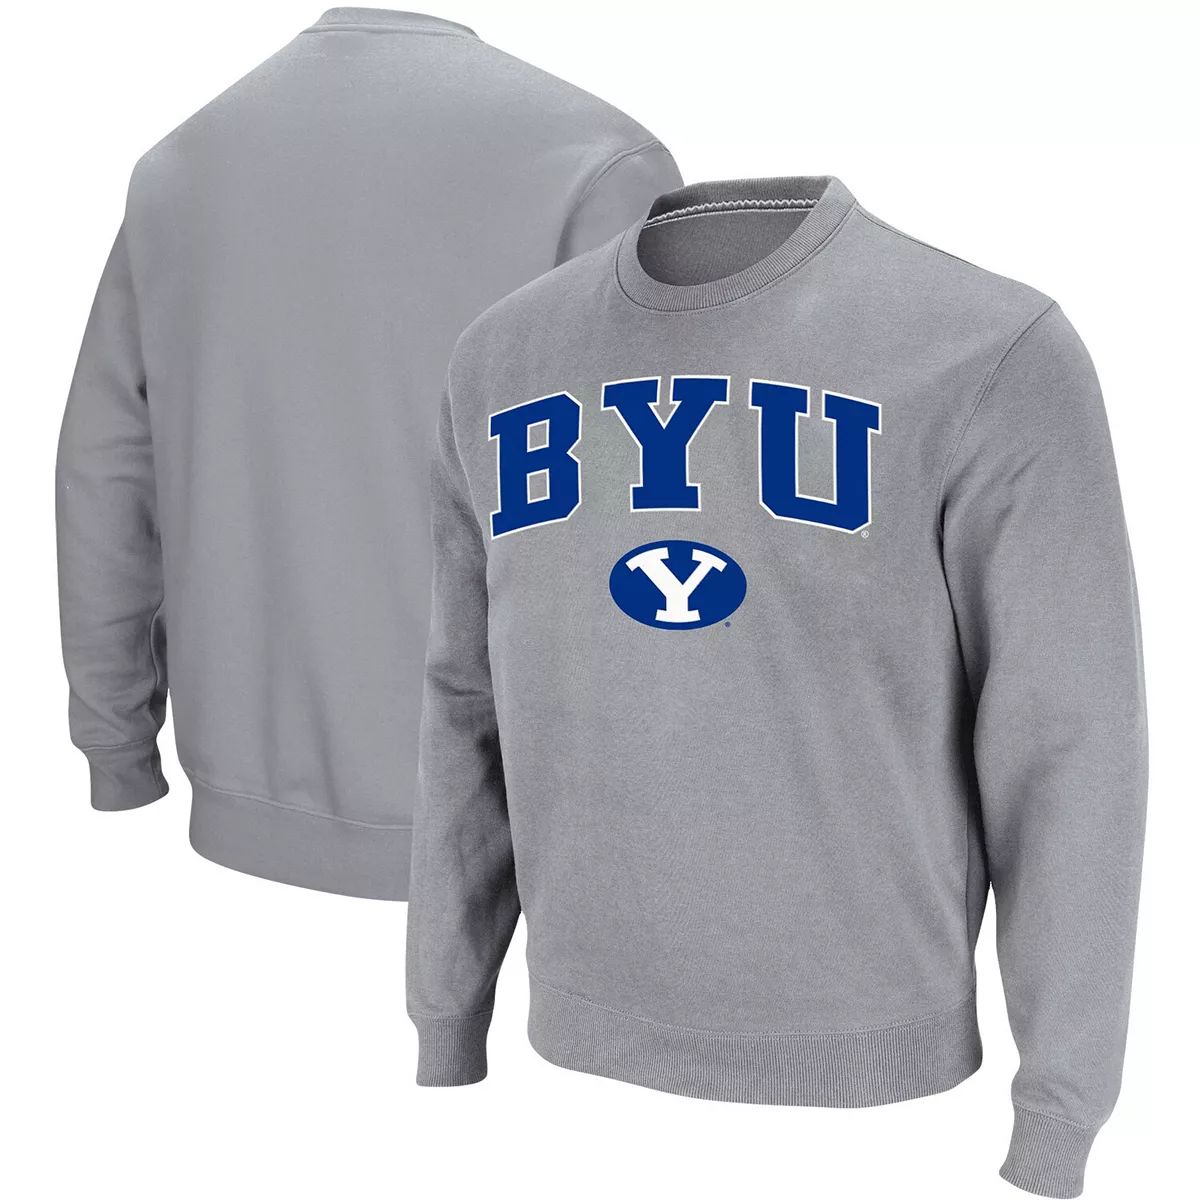 Men's Colosseum Heathered Gray BYU Cougars Arch & Logo Tackle Twill Pullover Sweatshirt | Kohl's